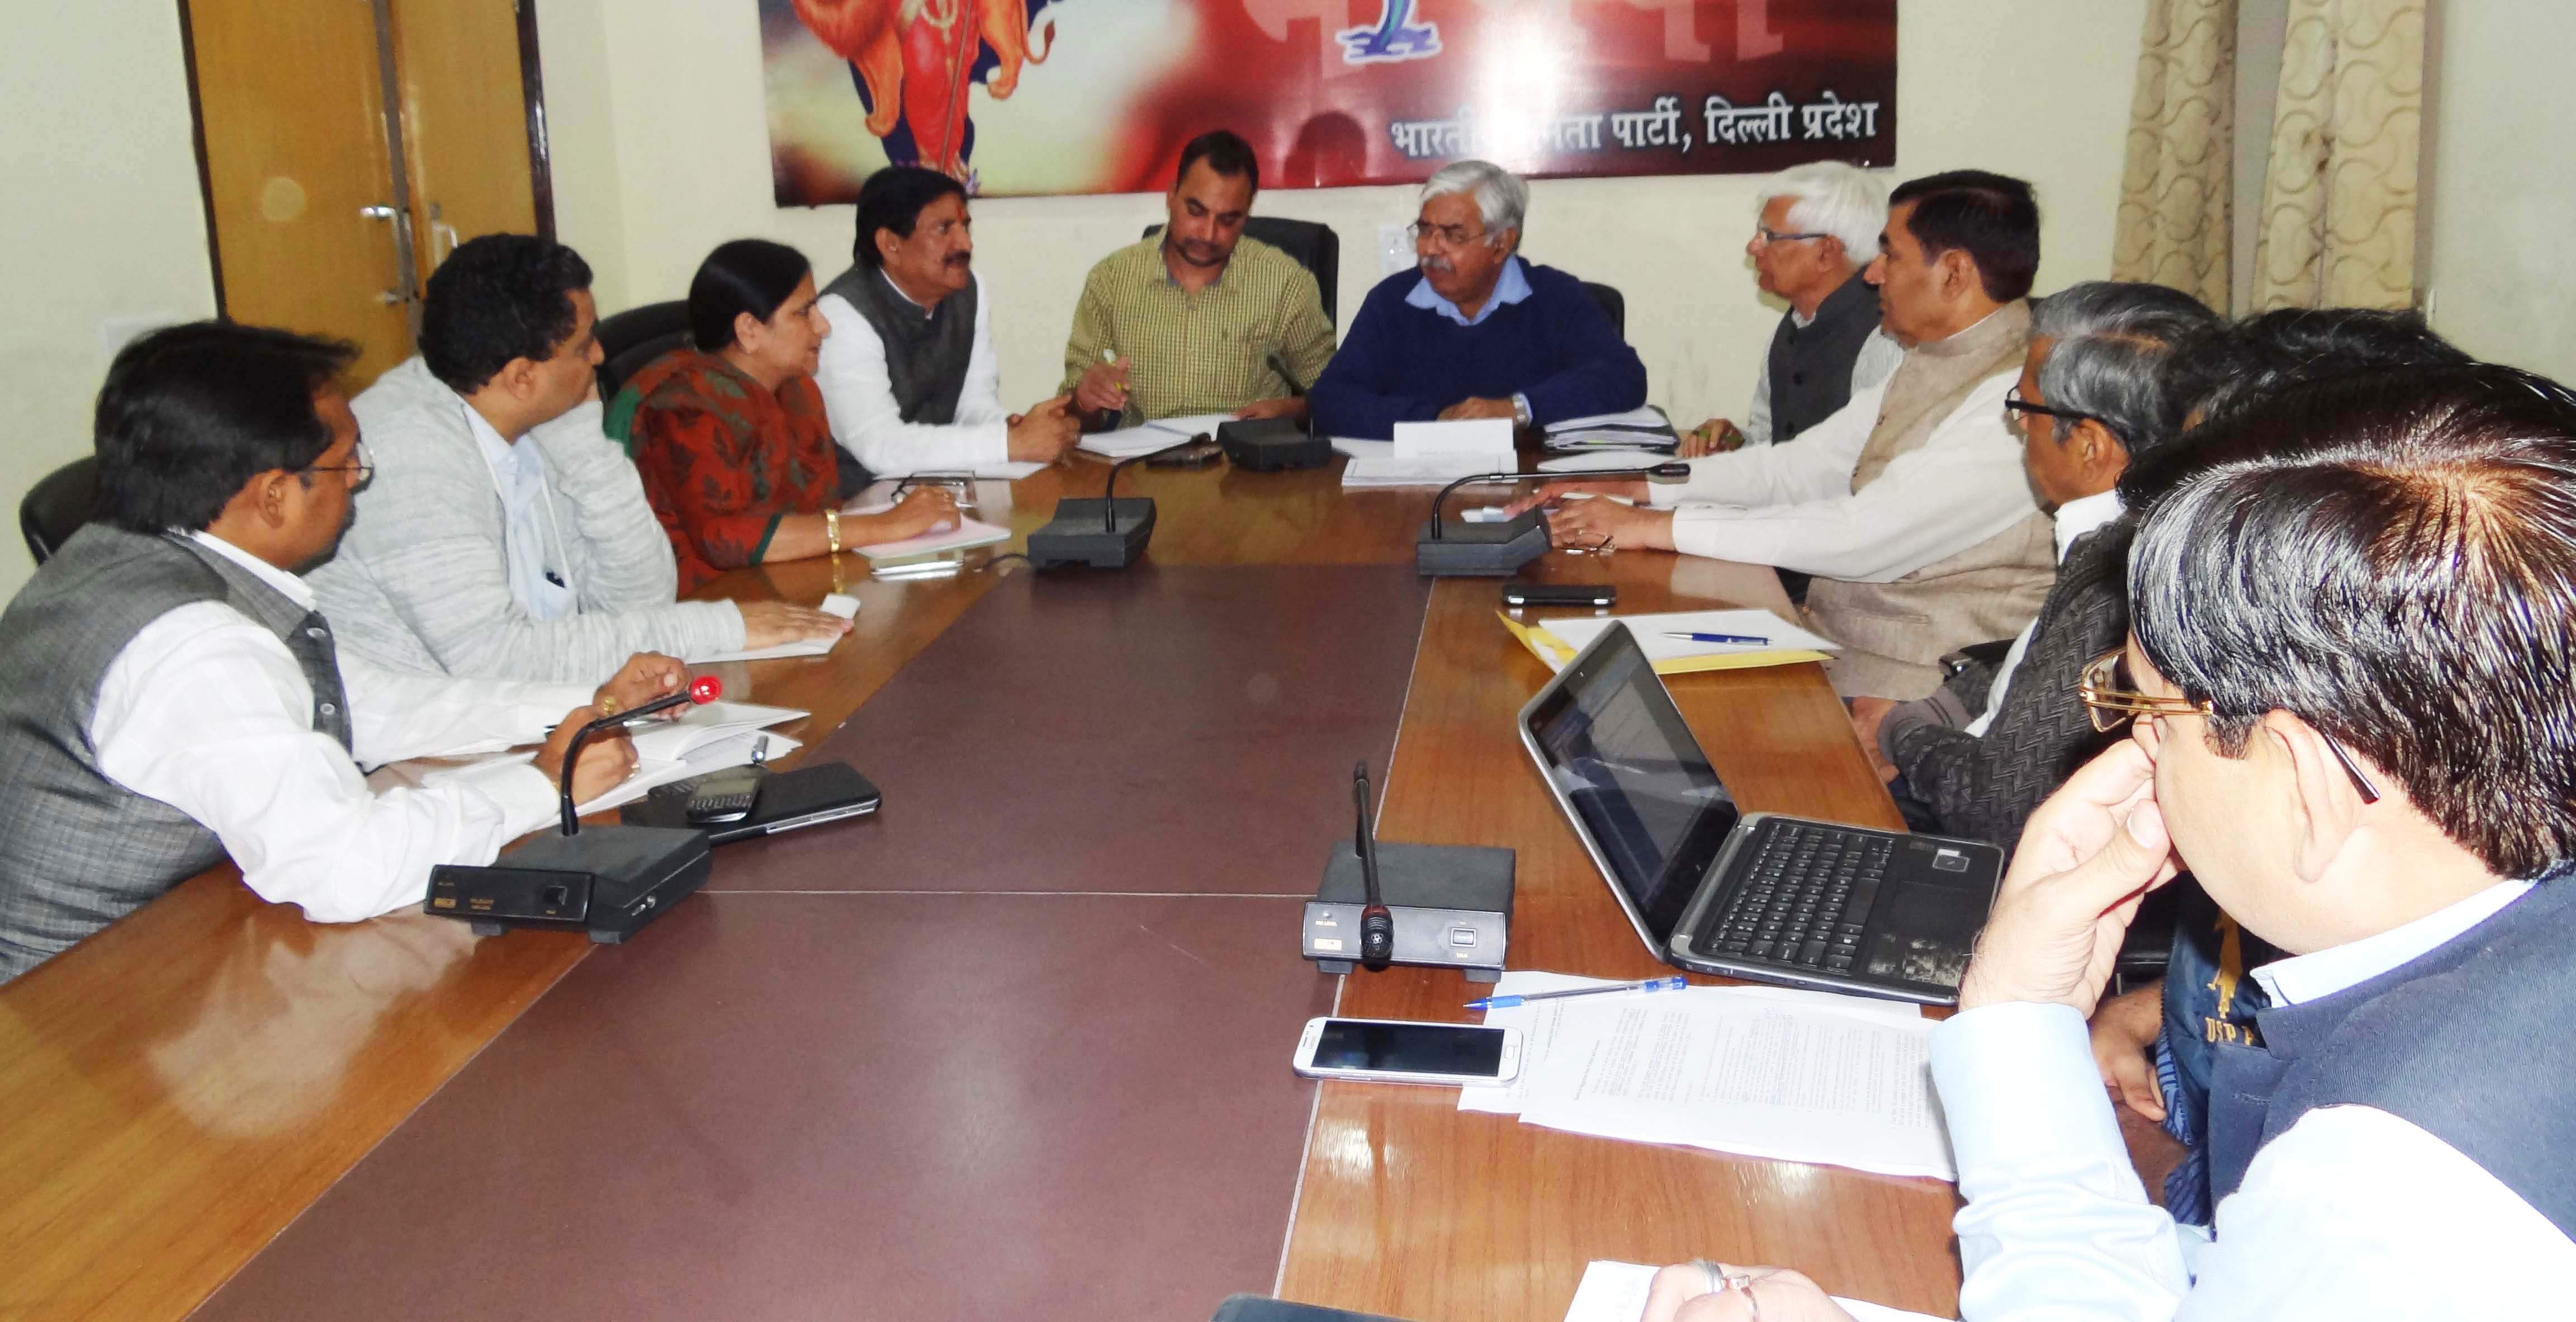 DELHI BJP ELECTION MANIFESTO 2015, MEMBERS DISCUSSED ABOUT THE PUBLIC ASPIRATIONS